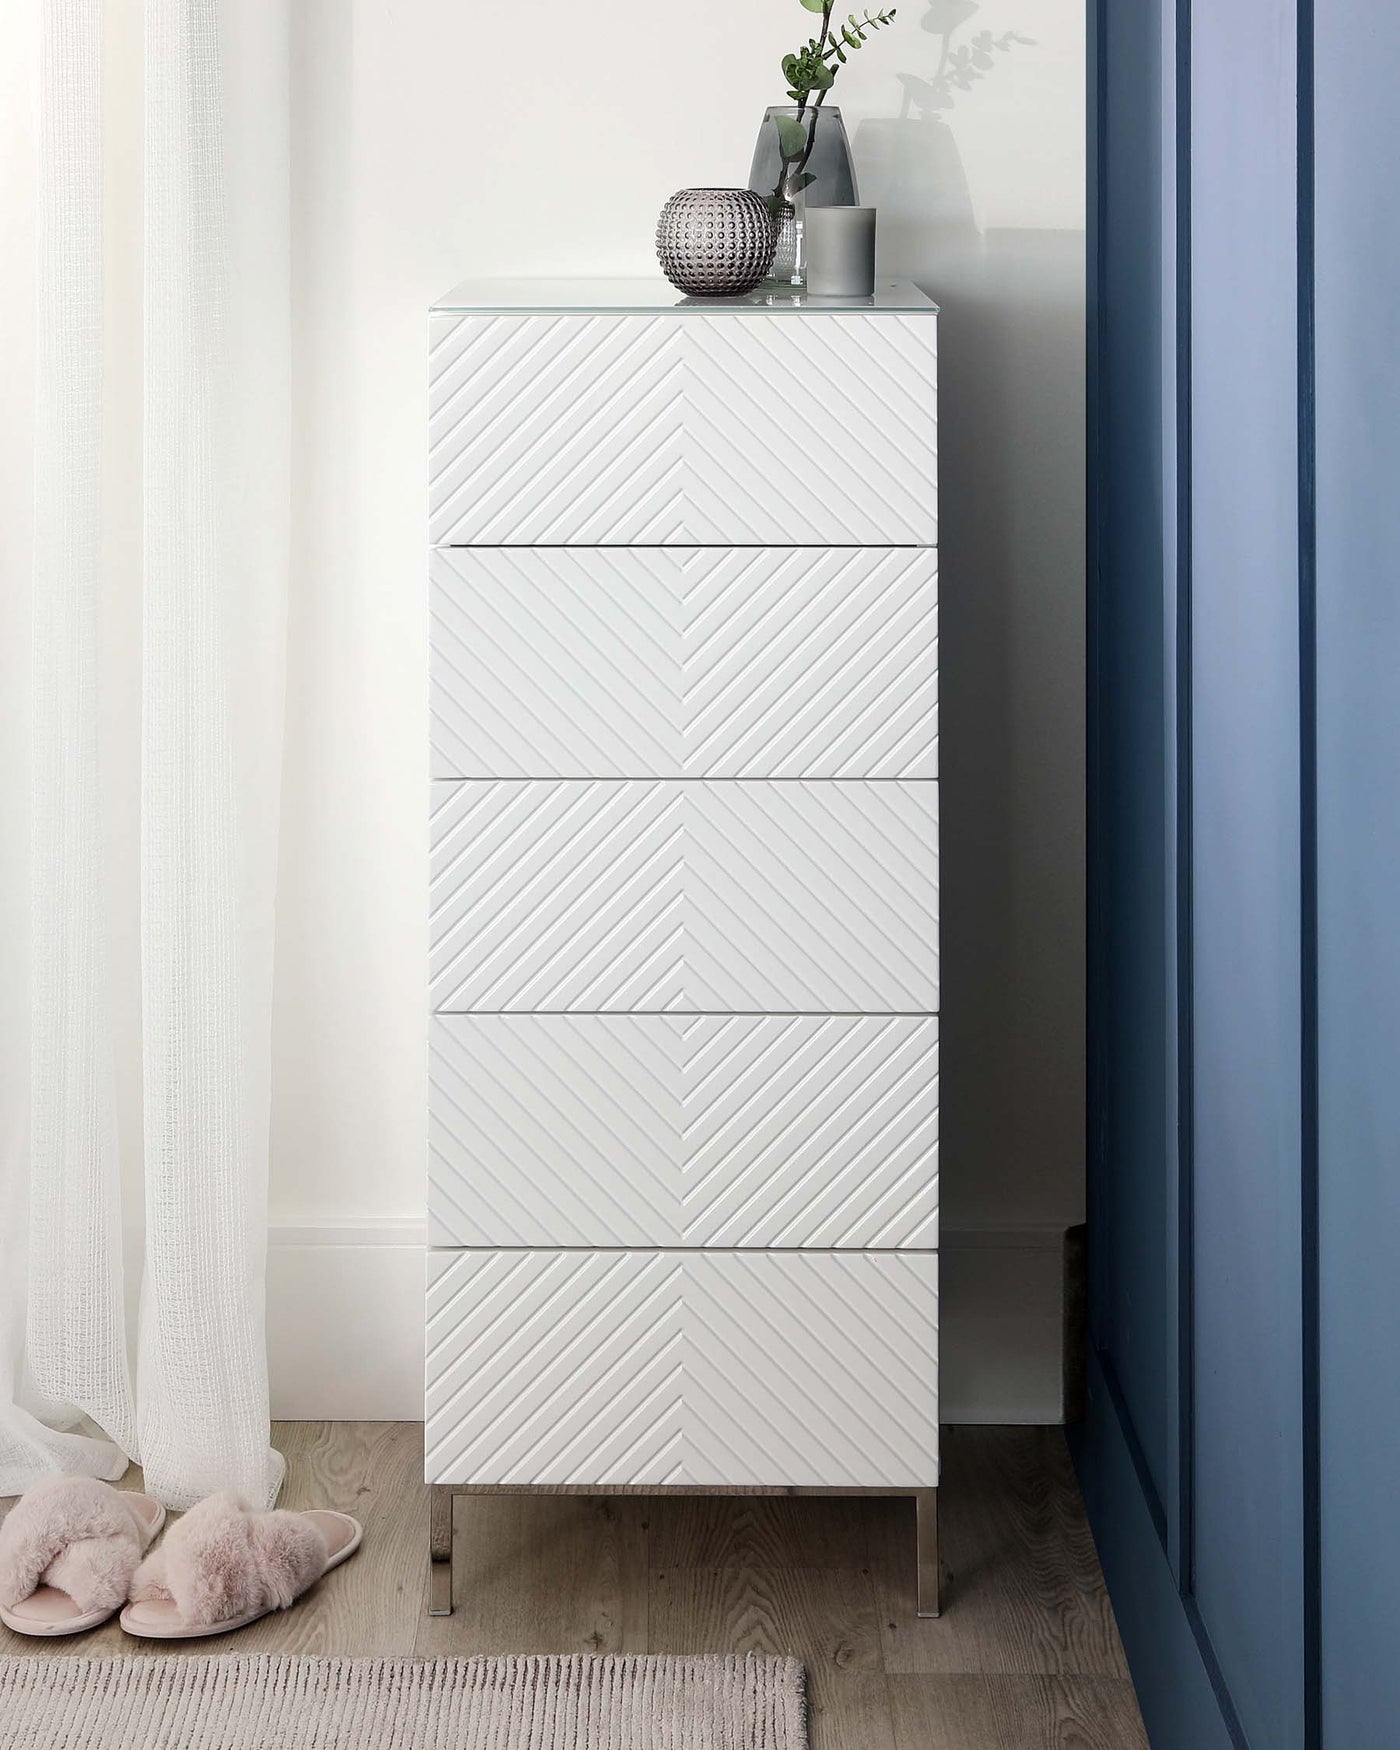 A modern white tall dresser with chevron patterned front, standing on four metallic legs.